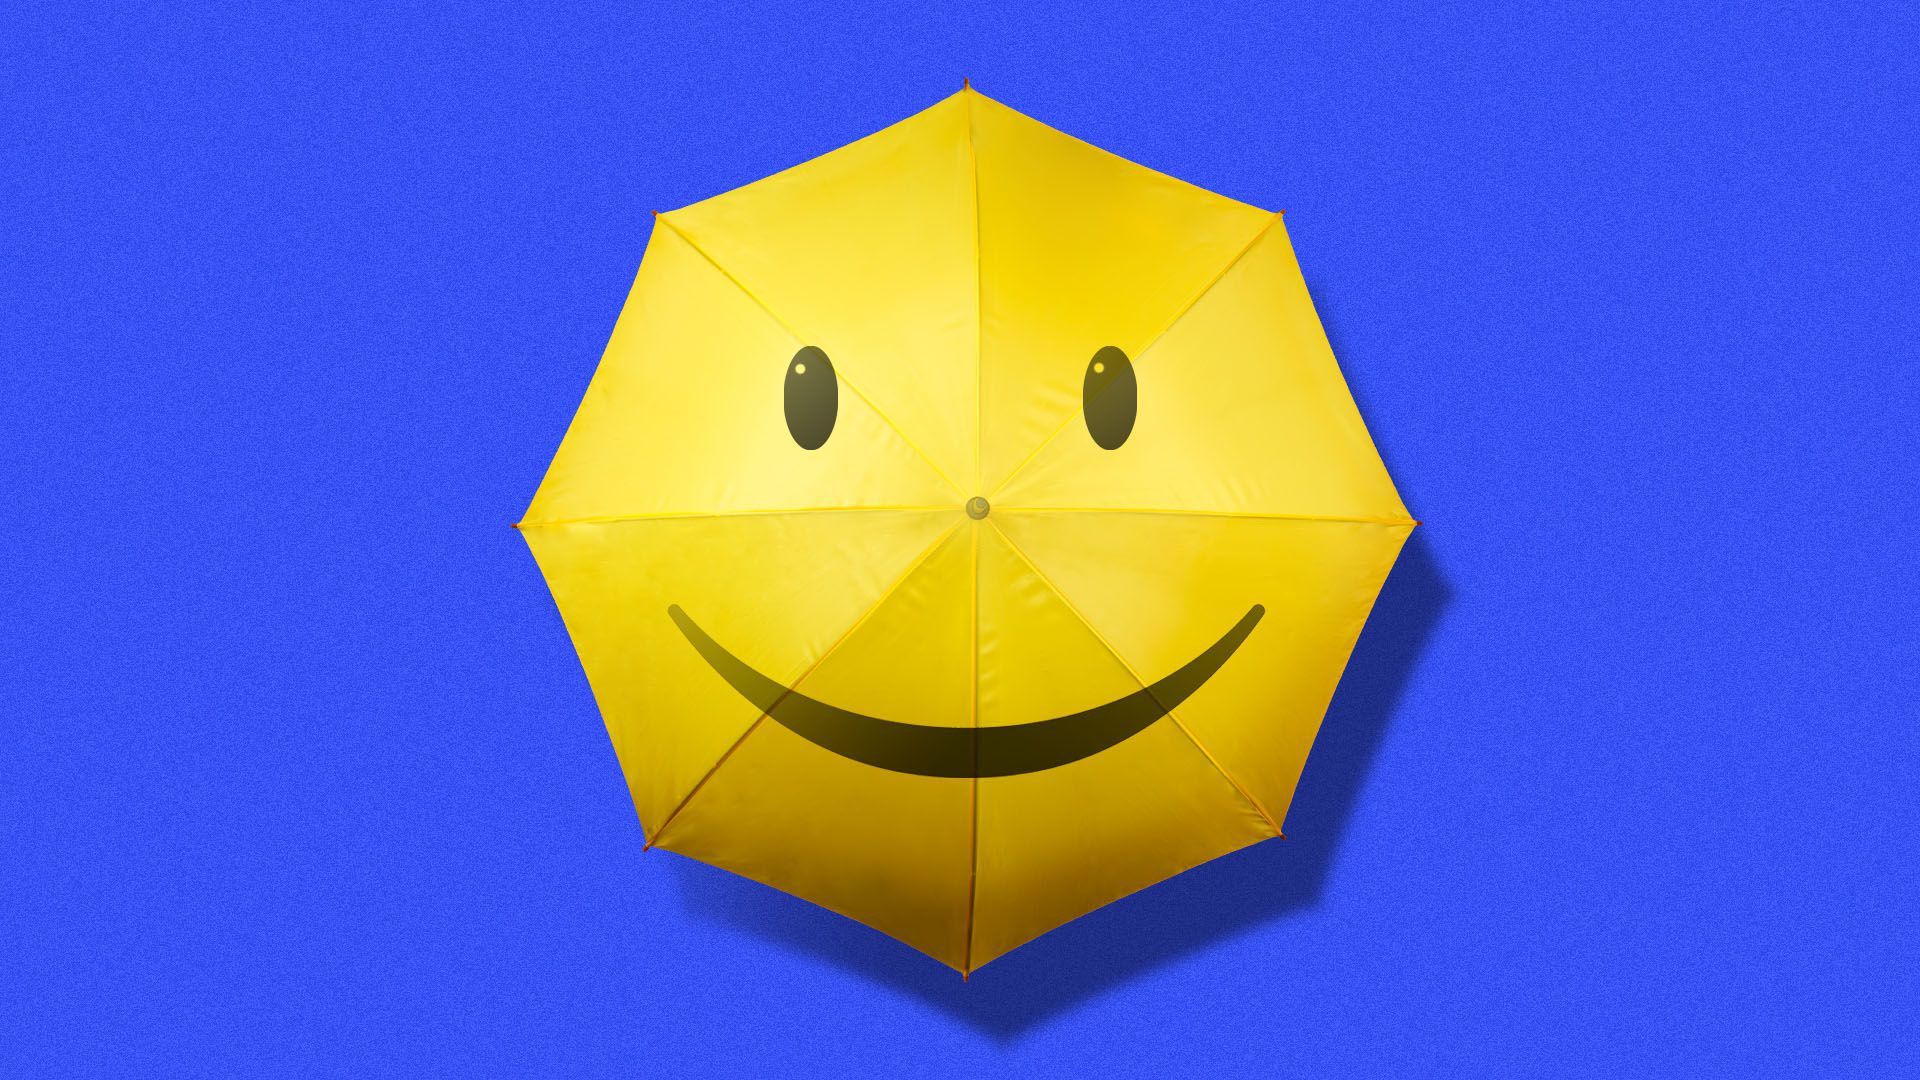 Illustration of an umbrella with a smiley face.